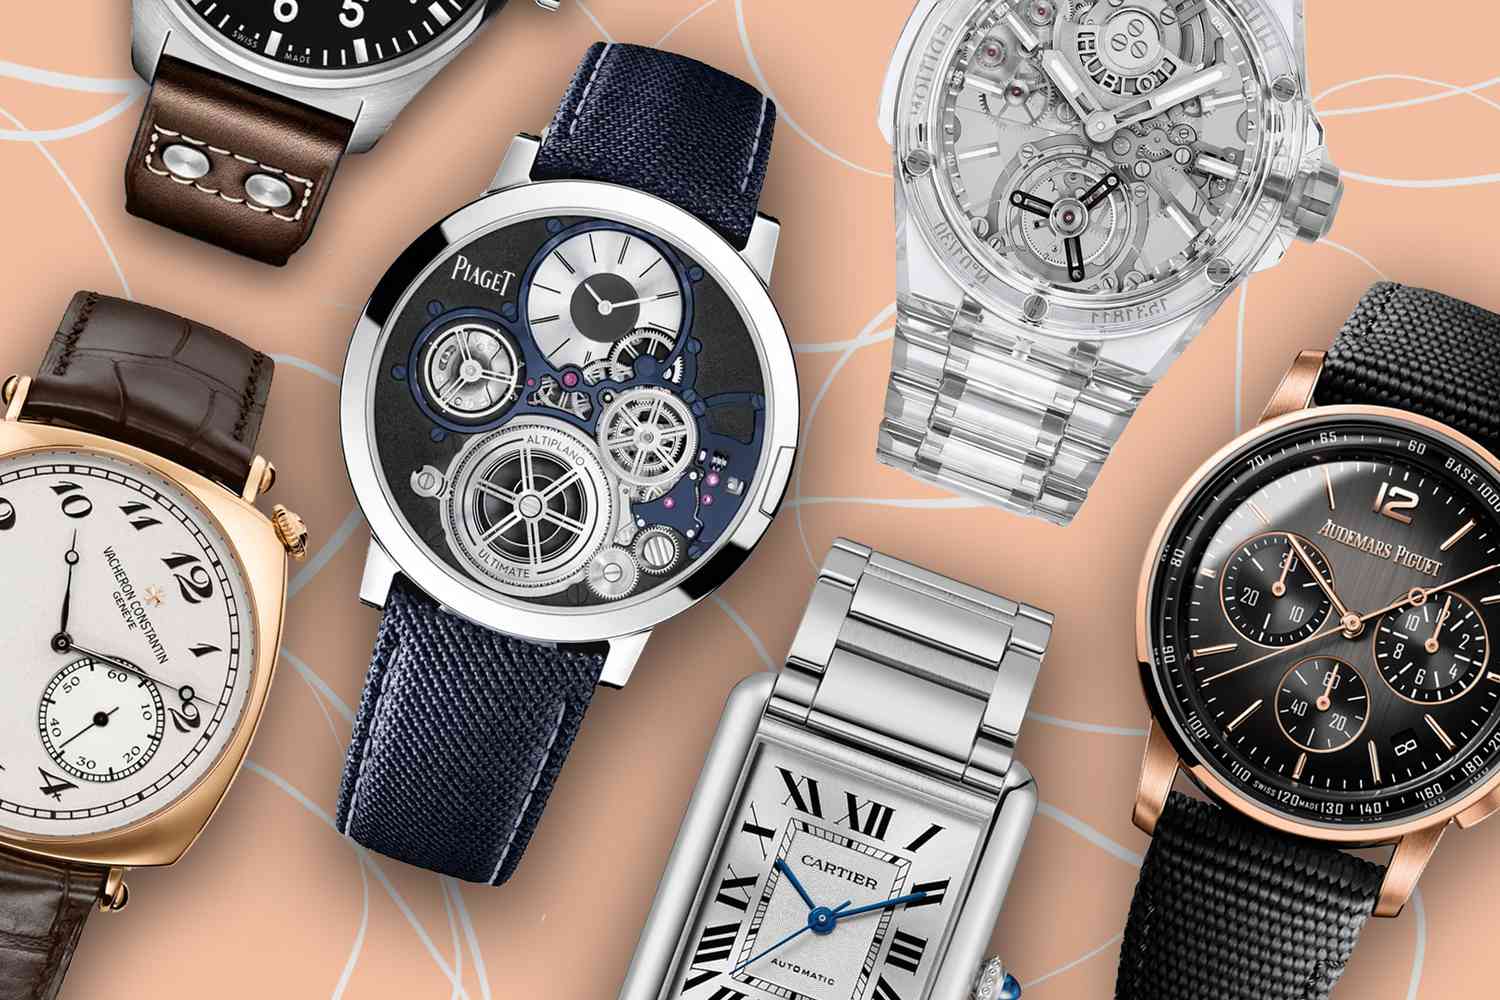 Luxury Watch Market Share 2022 | Industry Size, Growth, Trends And Forecast 2027